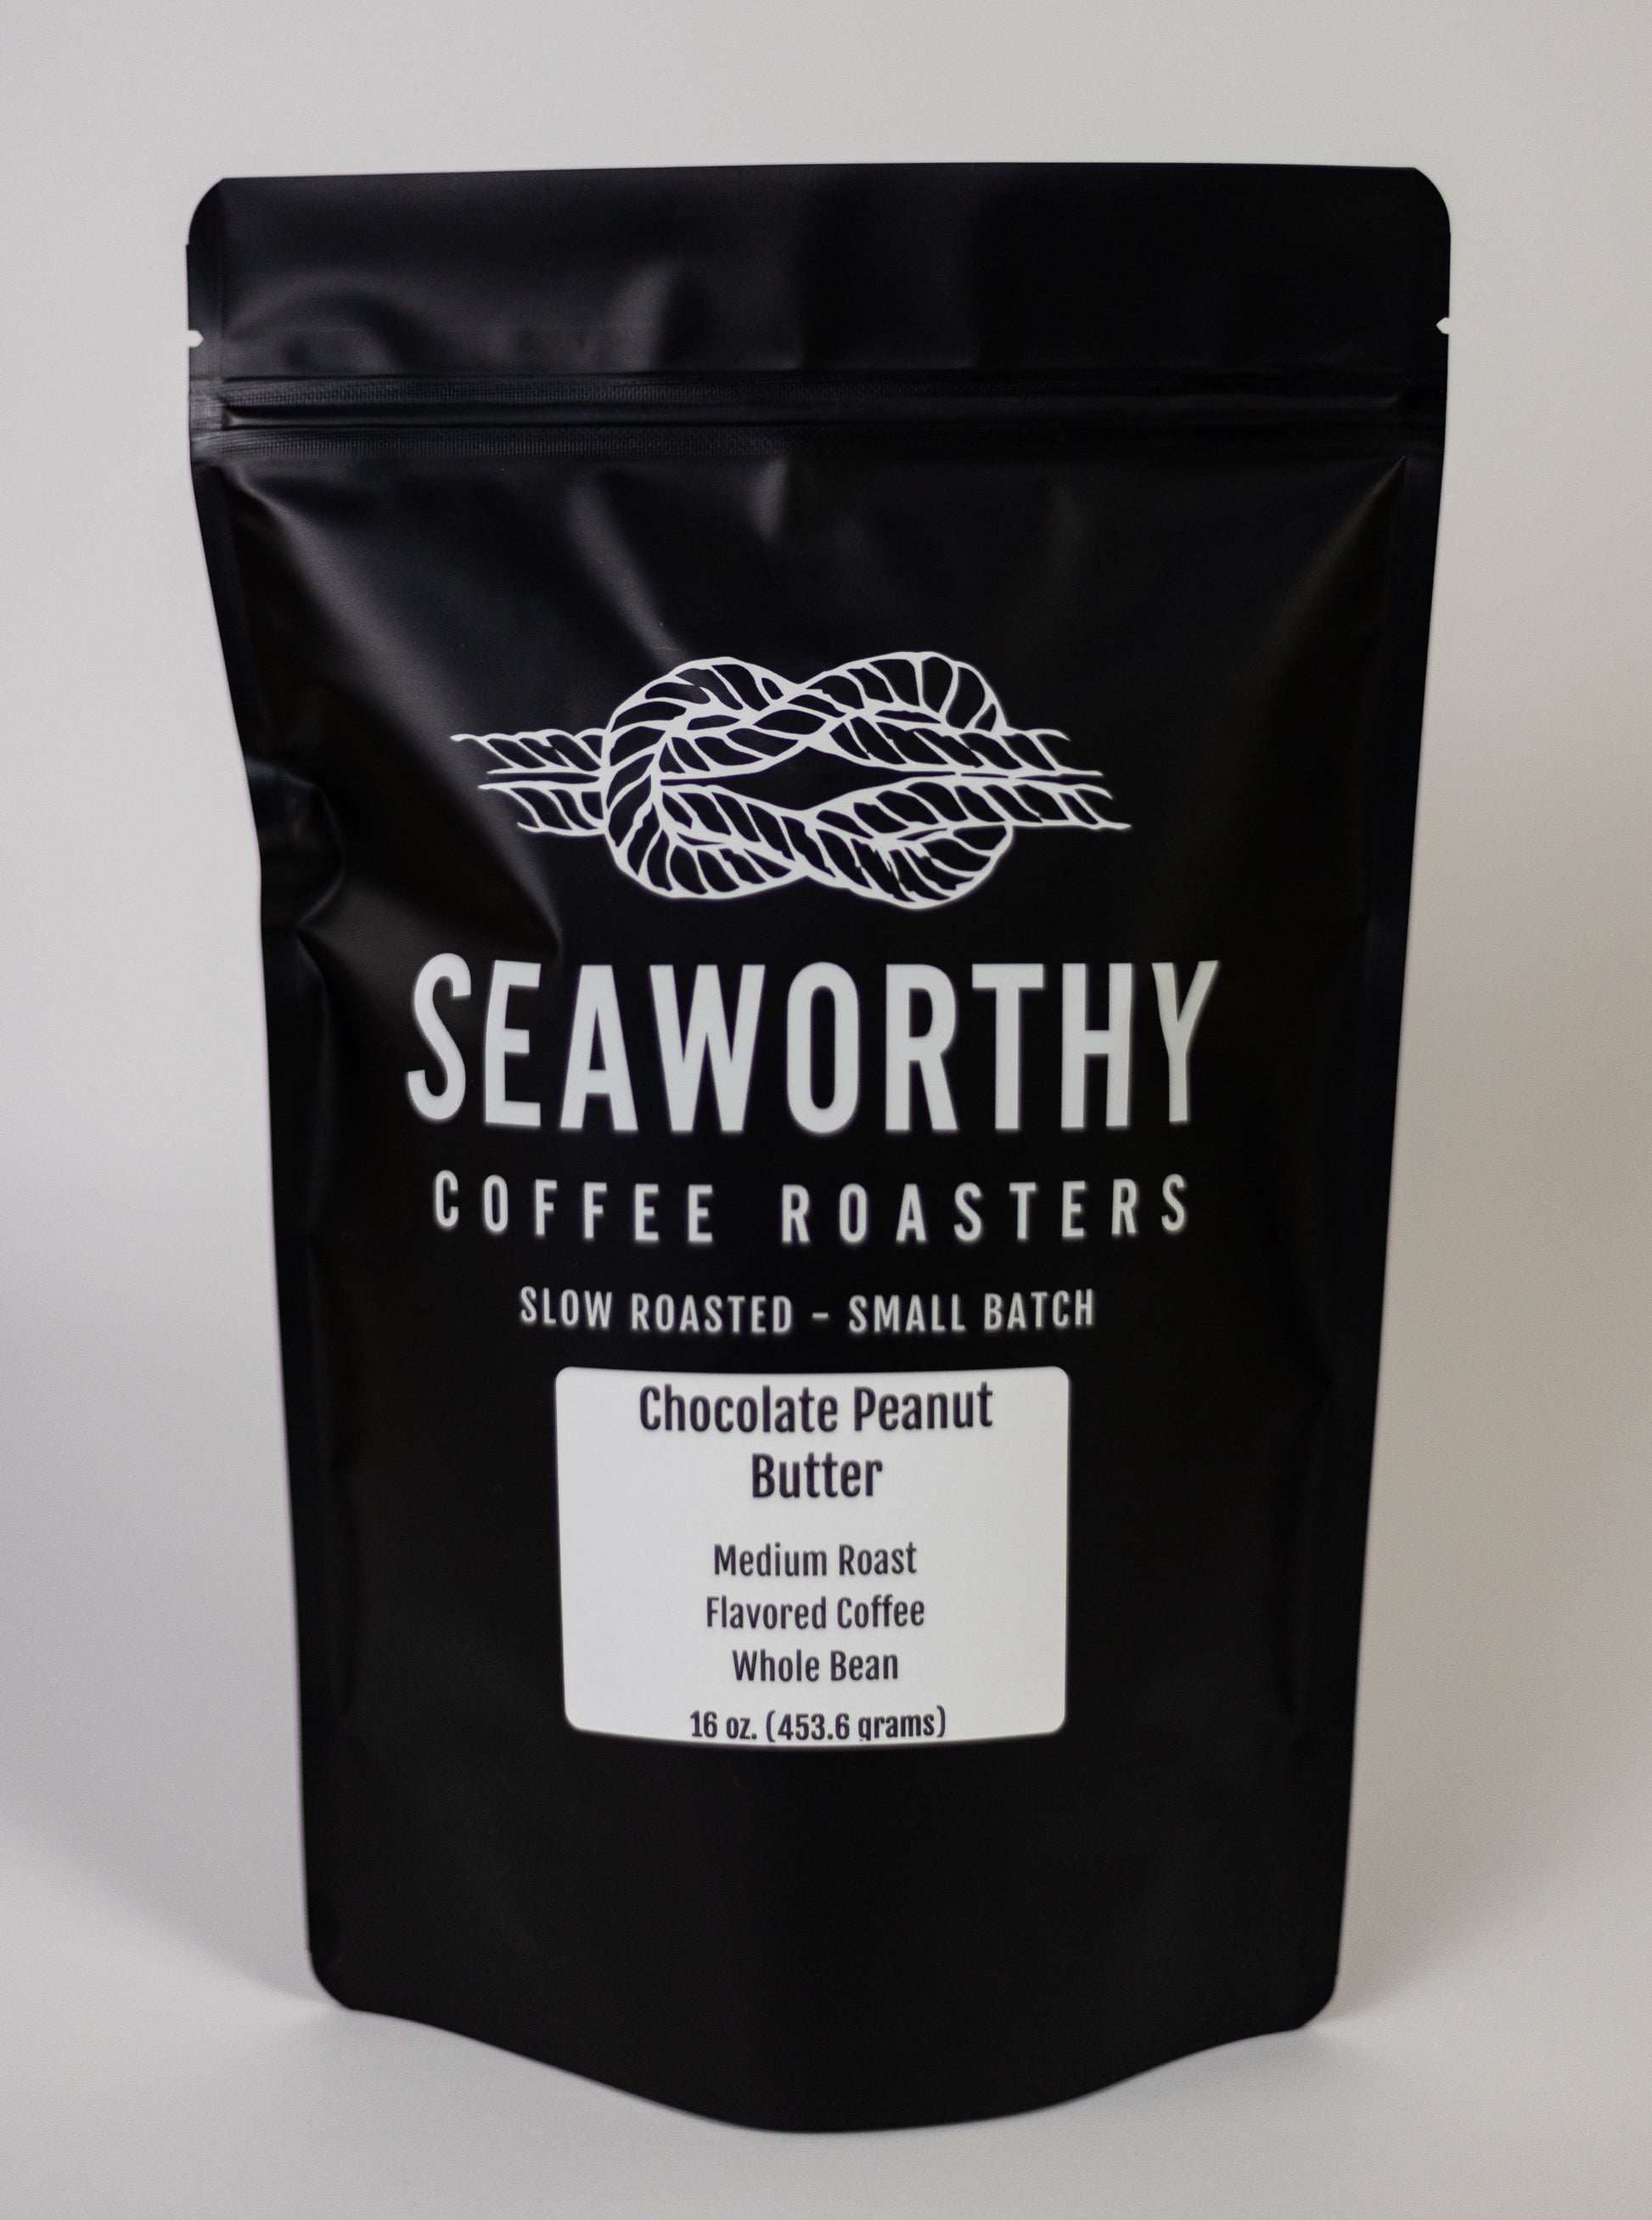 Seaworthy slow roasted, small batch coffee. Chocolate Peanut Butter flavored coffee is bringing the decadent combination of chocolate and peanut butter to your mug, and wow does it compliment the coffee well! We think this one tastes great no matter how you brew it, but try this one cold brewed and you'll never look back!